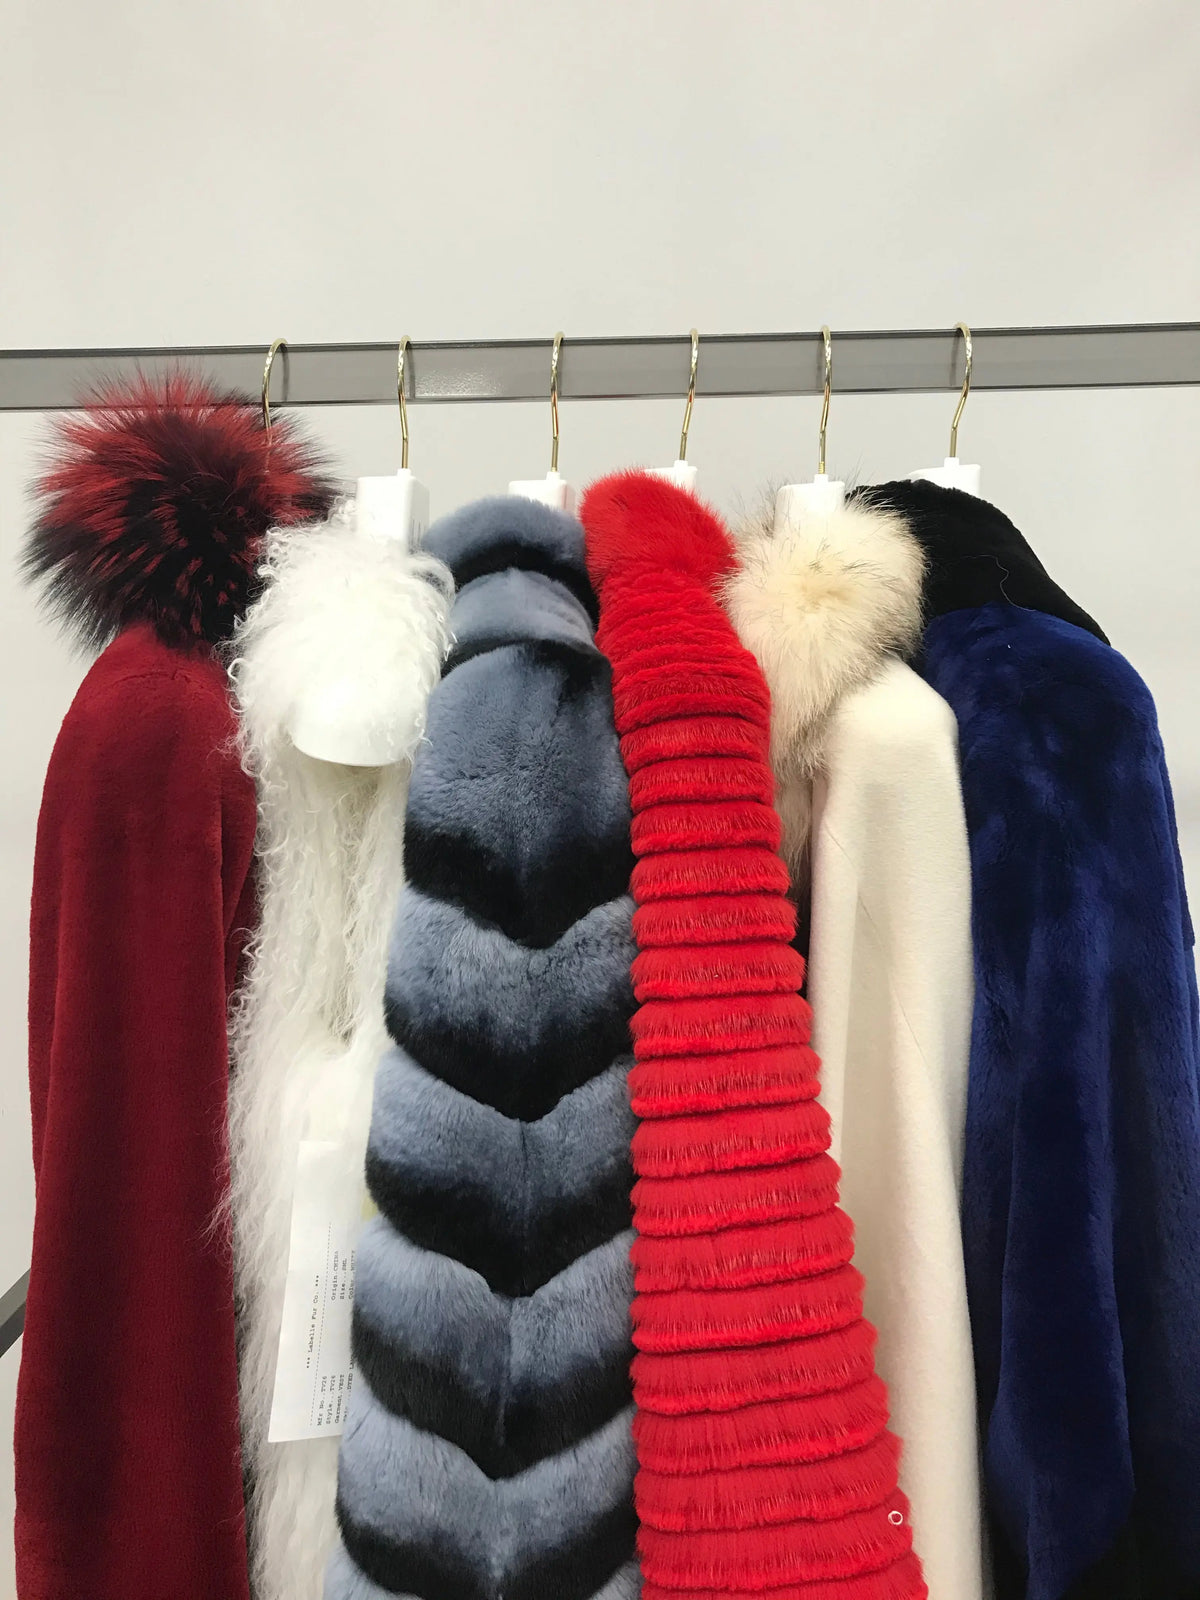 Red, White, and Blue - colorful furs for you!